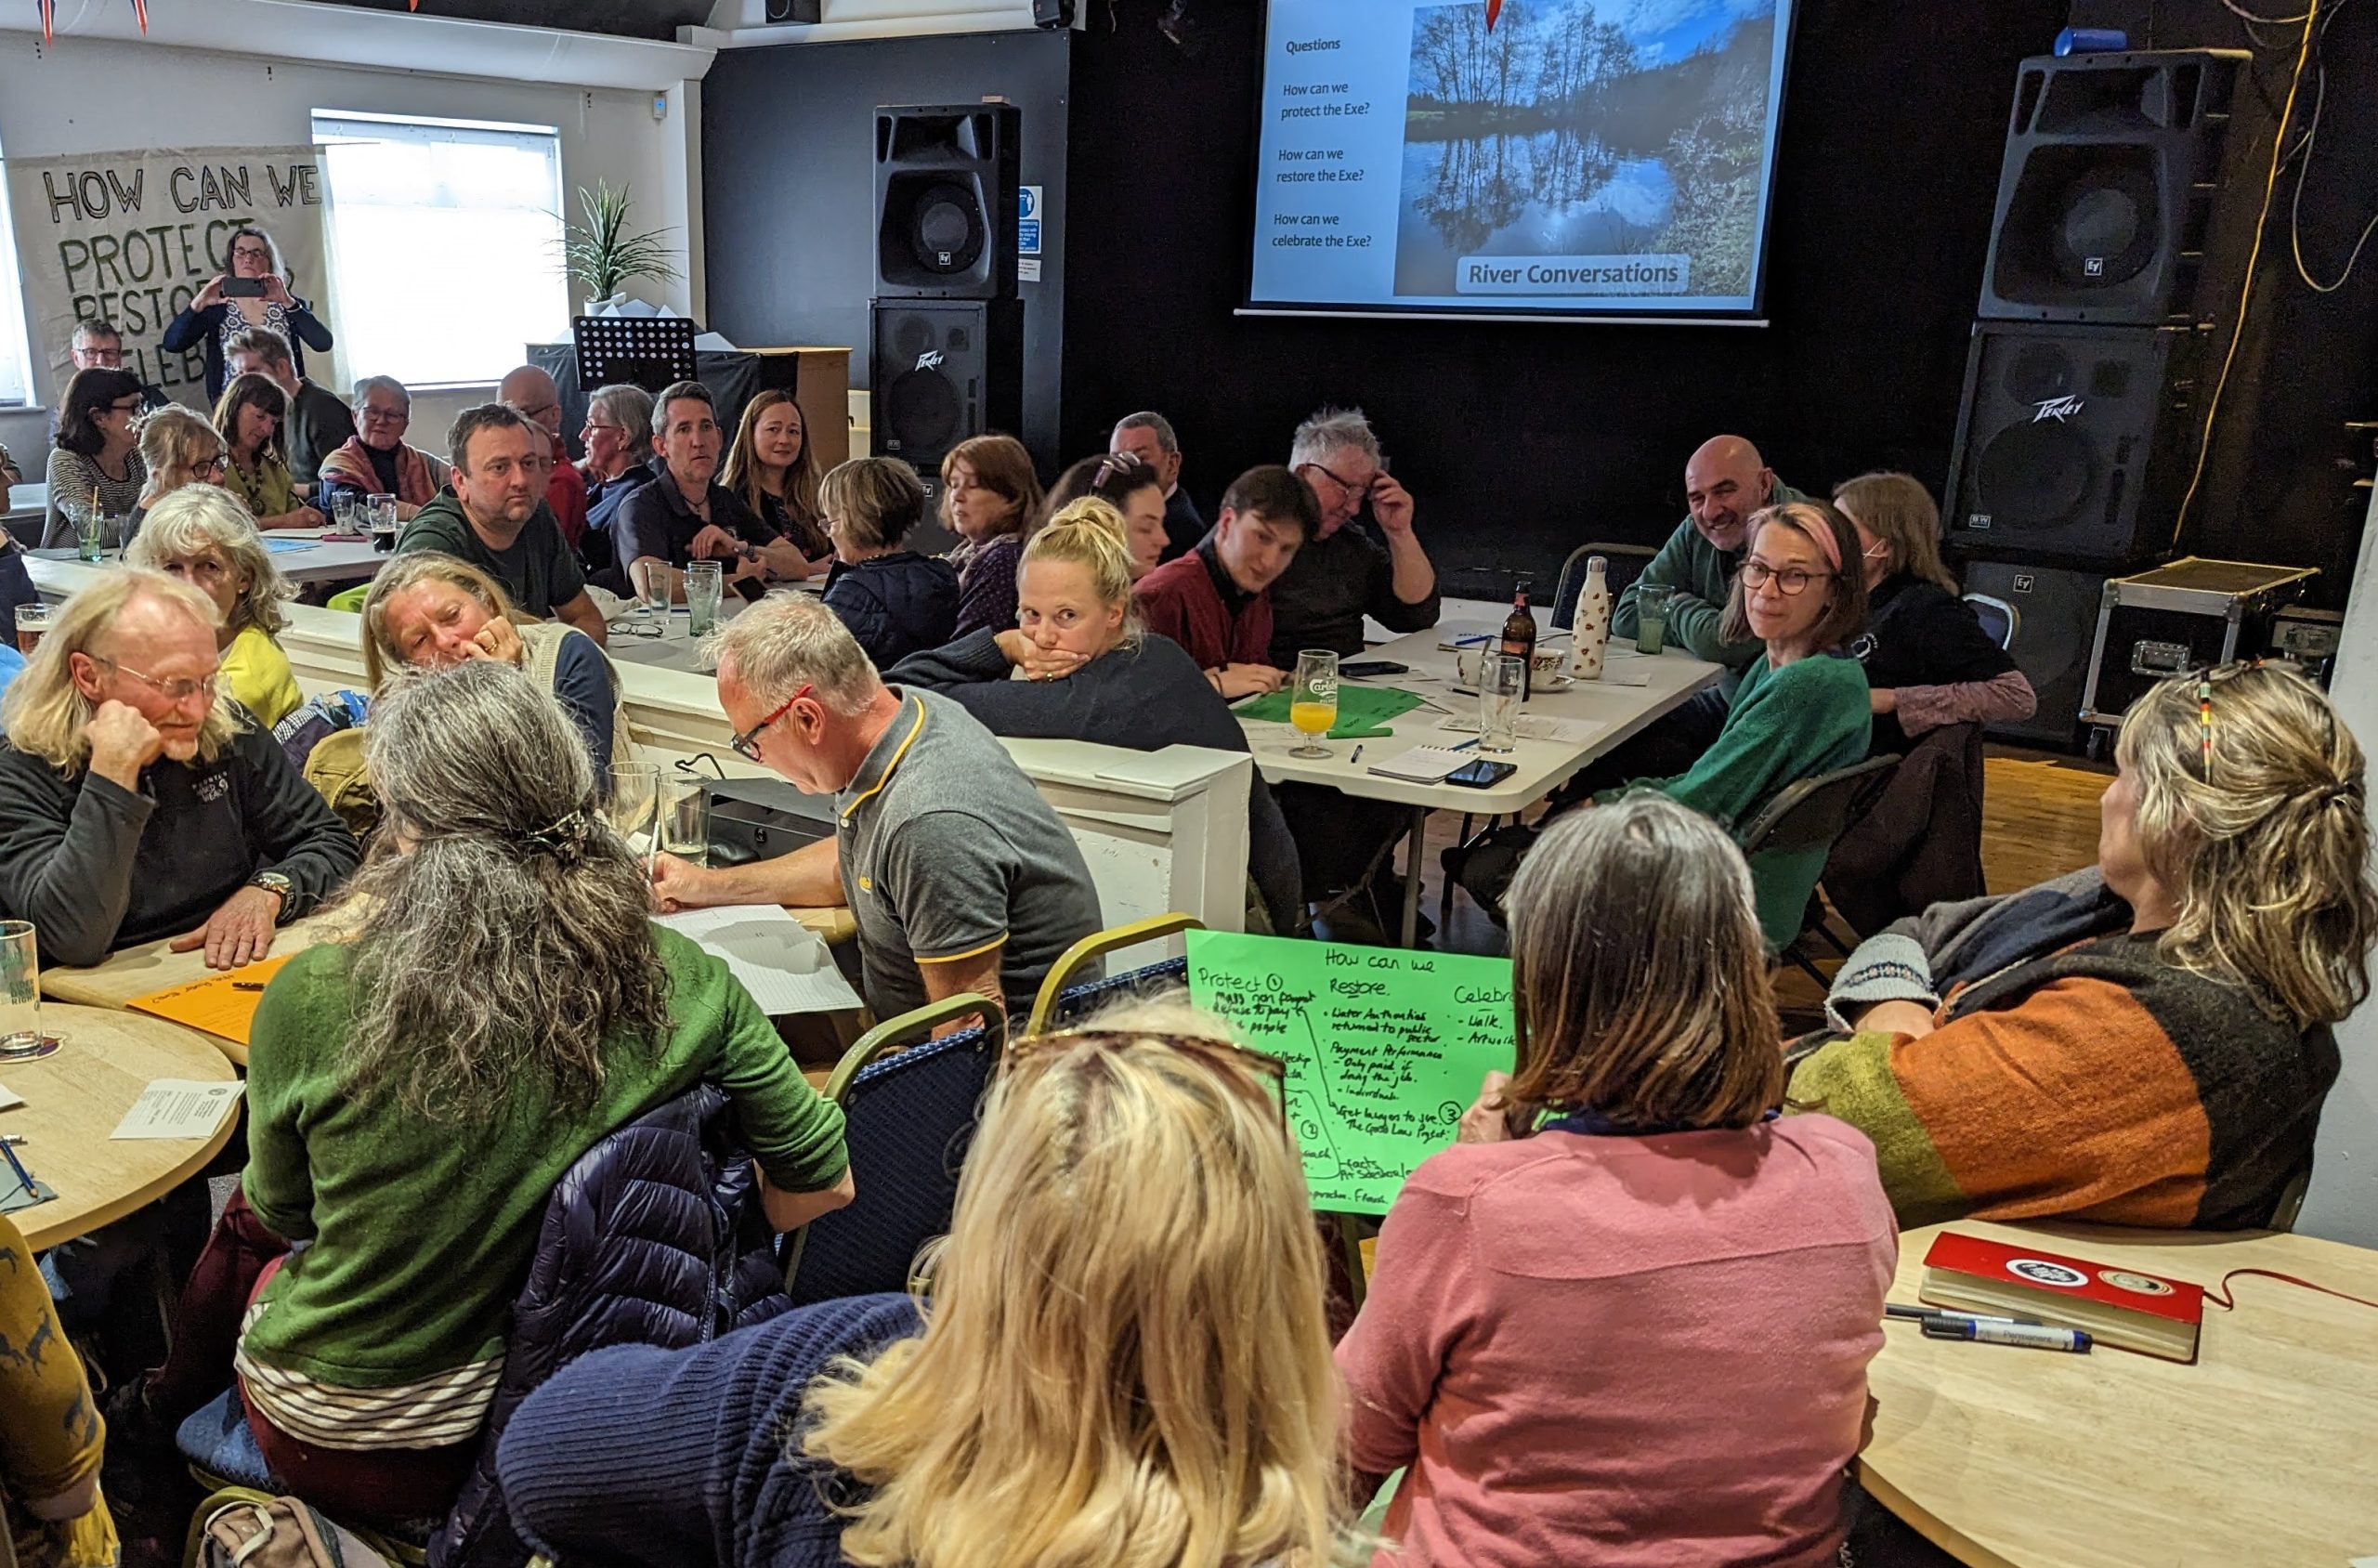 People gather at tables in a community hall to discuss how to protect, celebrate and restore the River Exe.